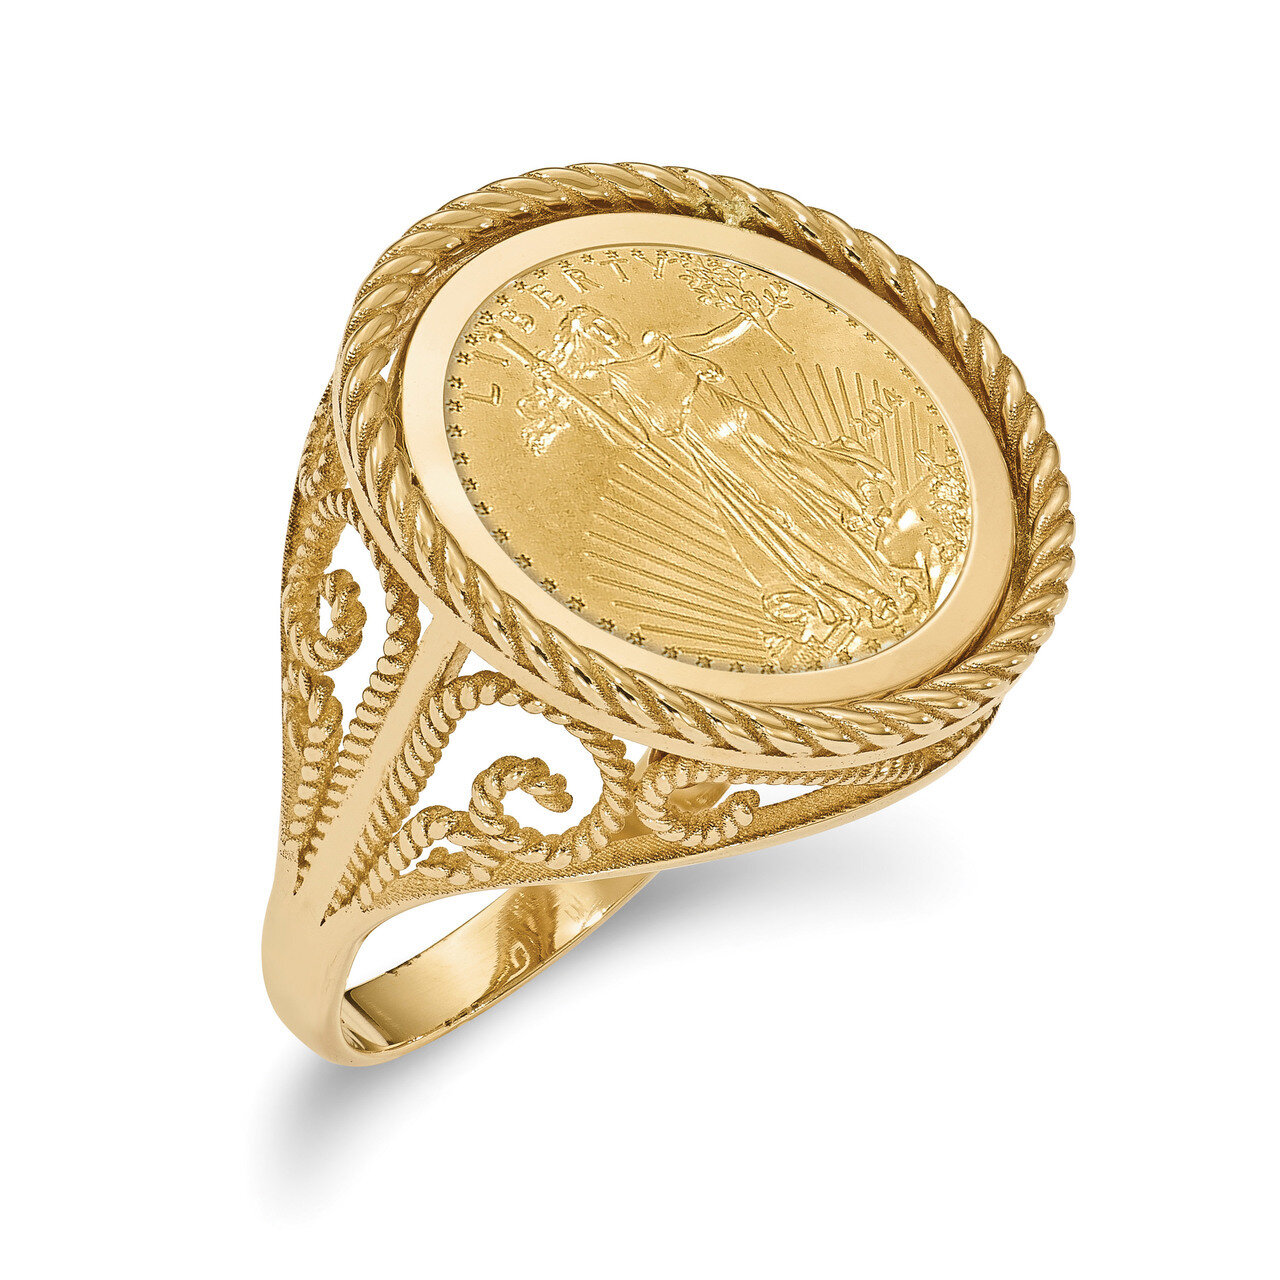 1/10AE Polished Coin Ring with coin 14k Gold CR11/10AEC